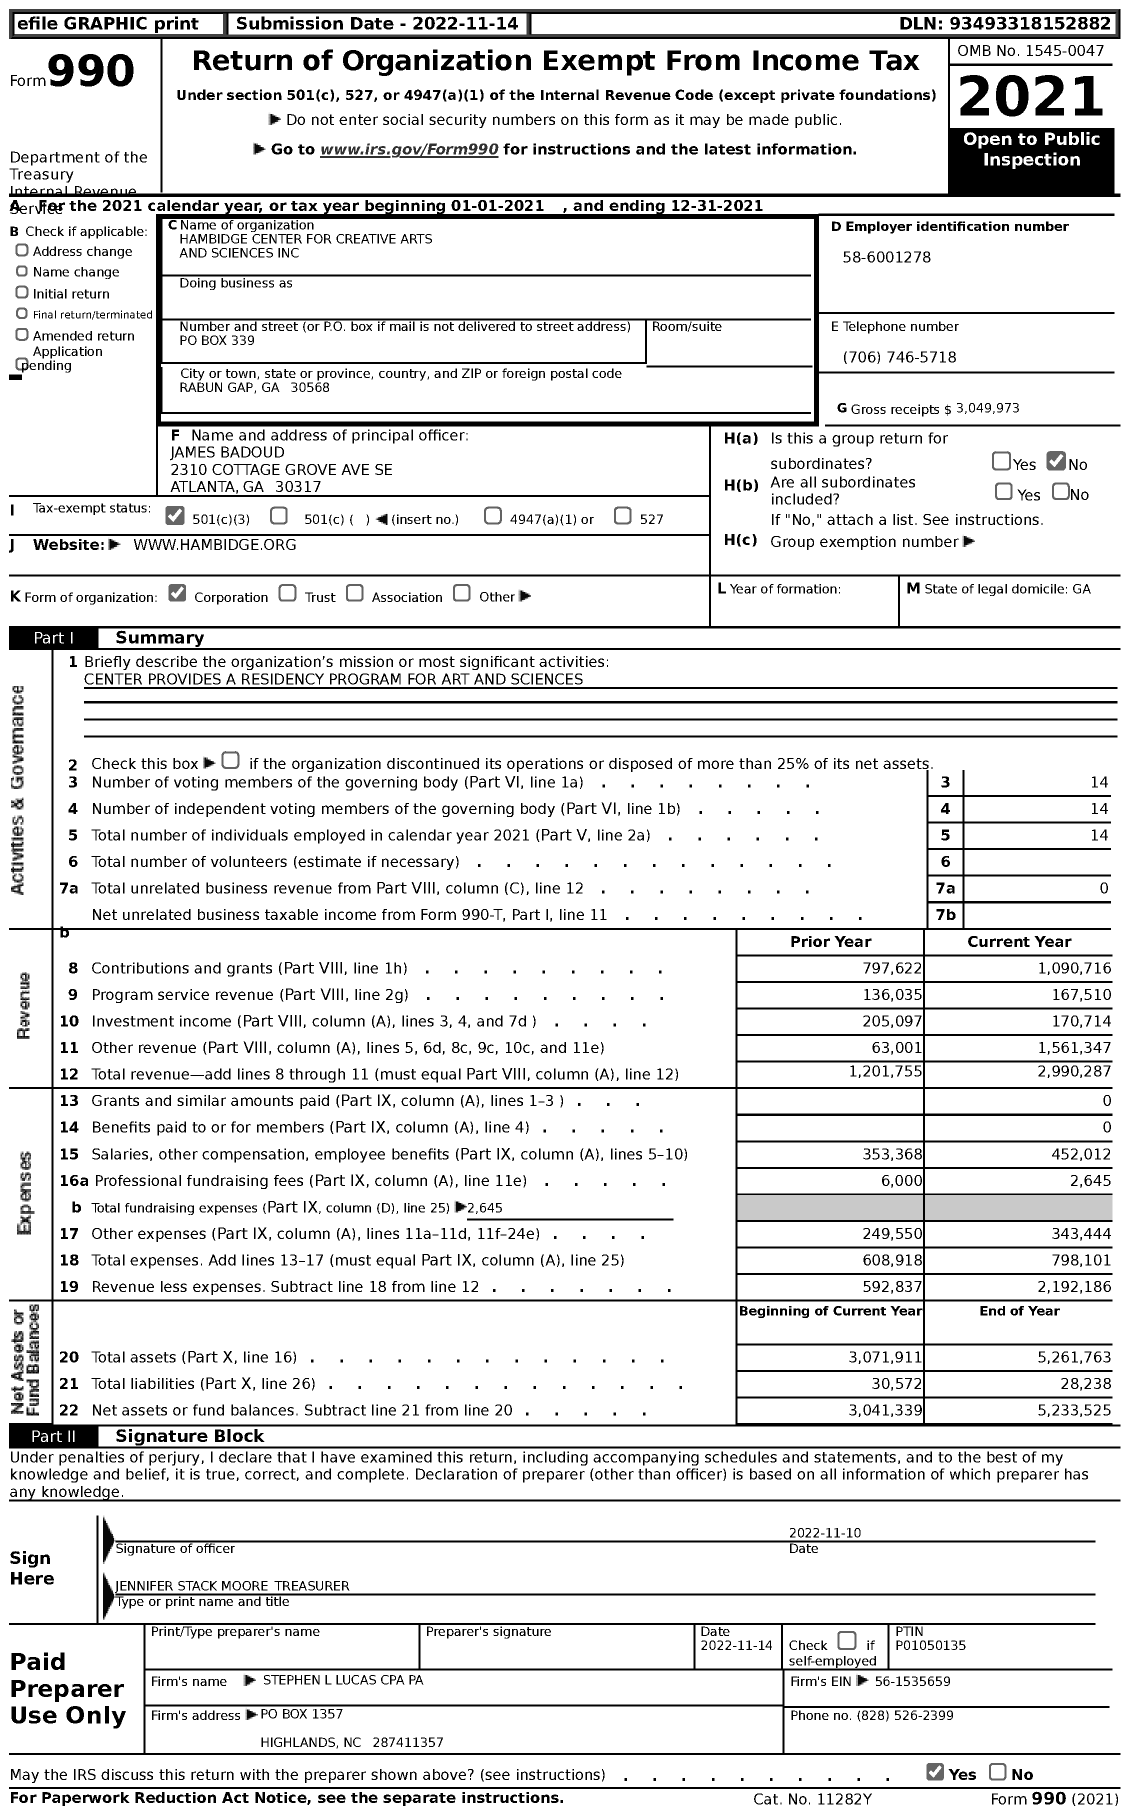 Image of first page of 2021 Form 990 for Hambidge Center for Creative Arts and Sciences